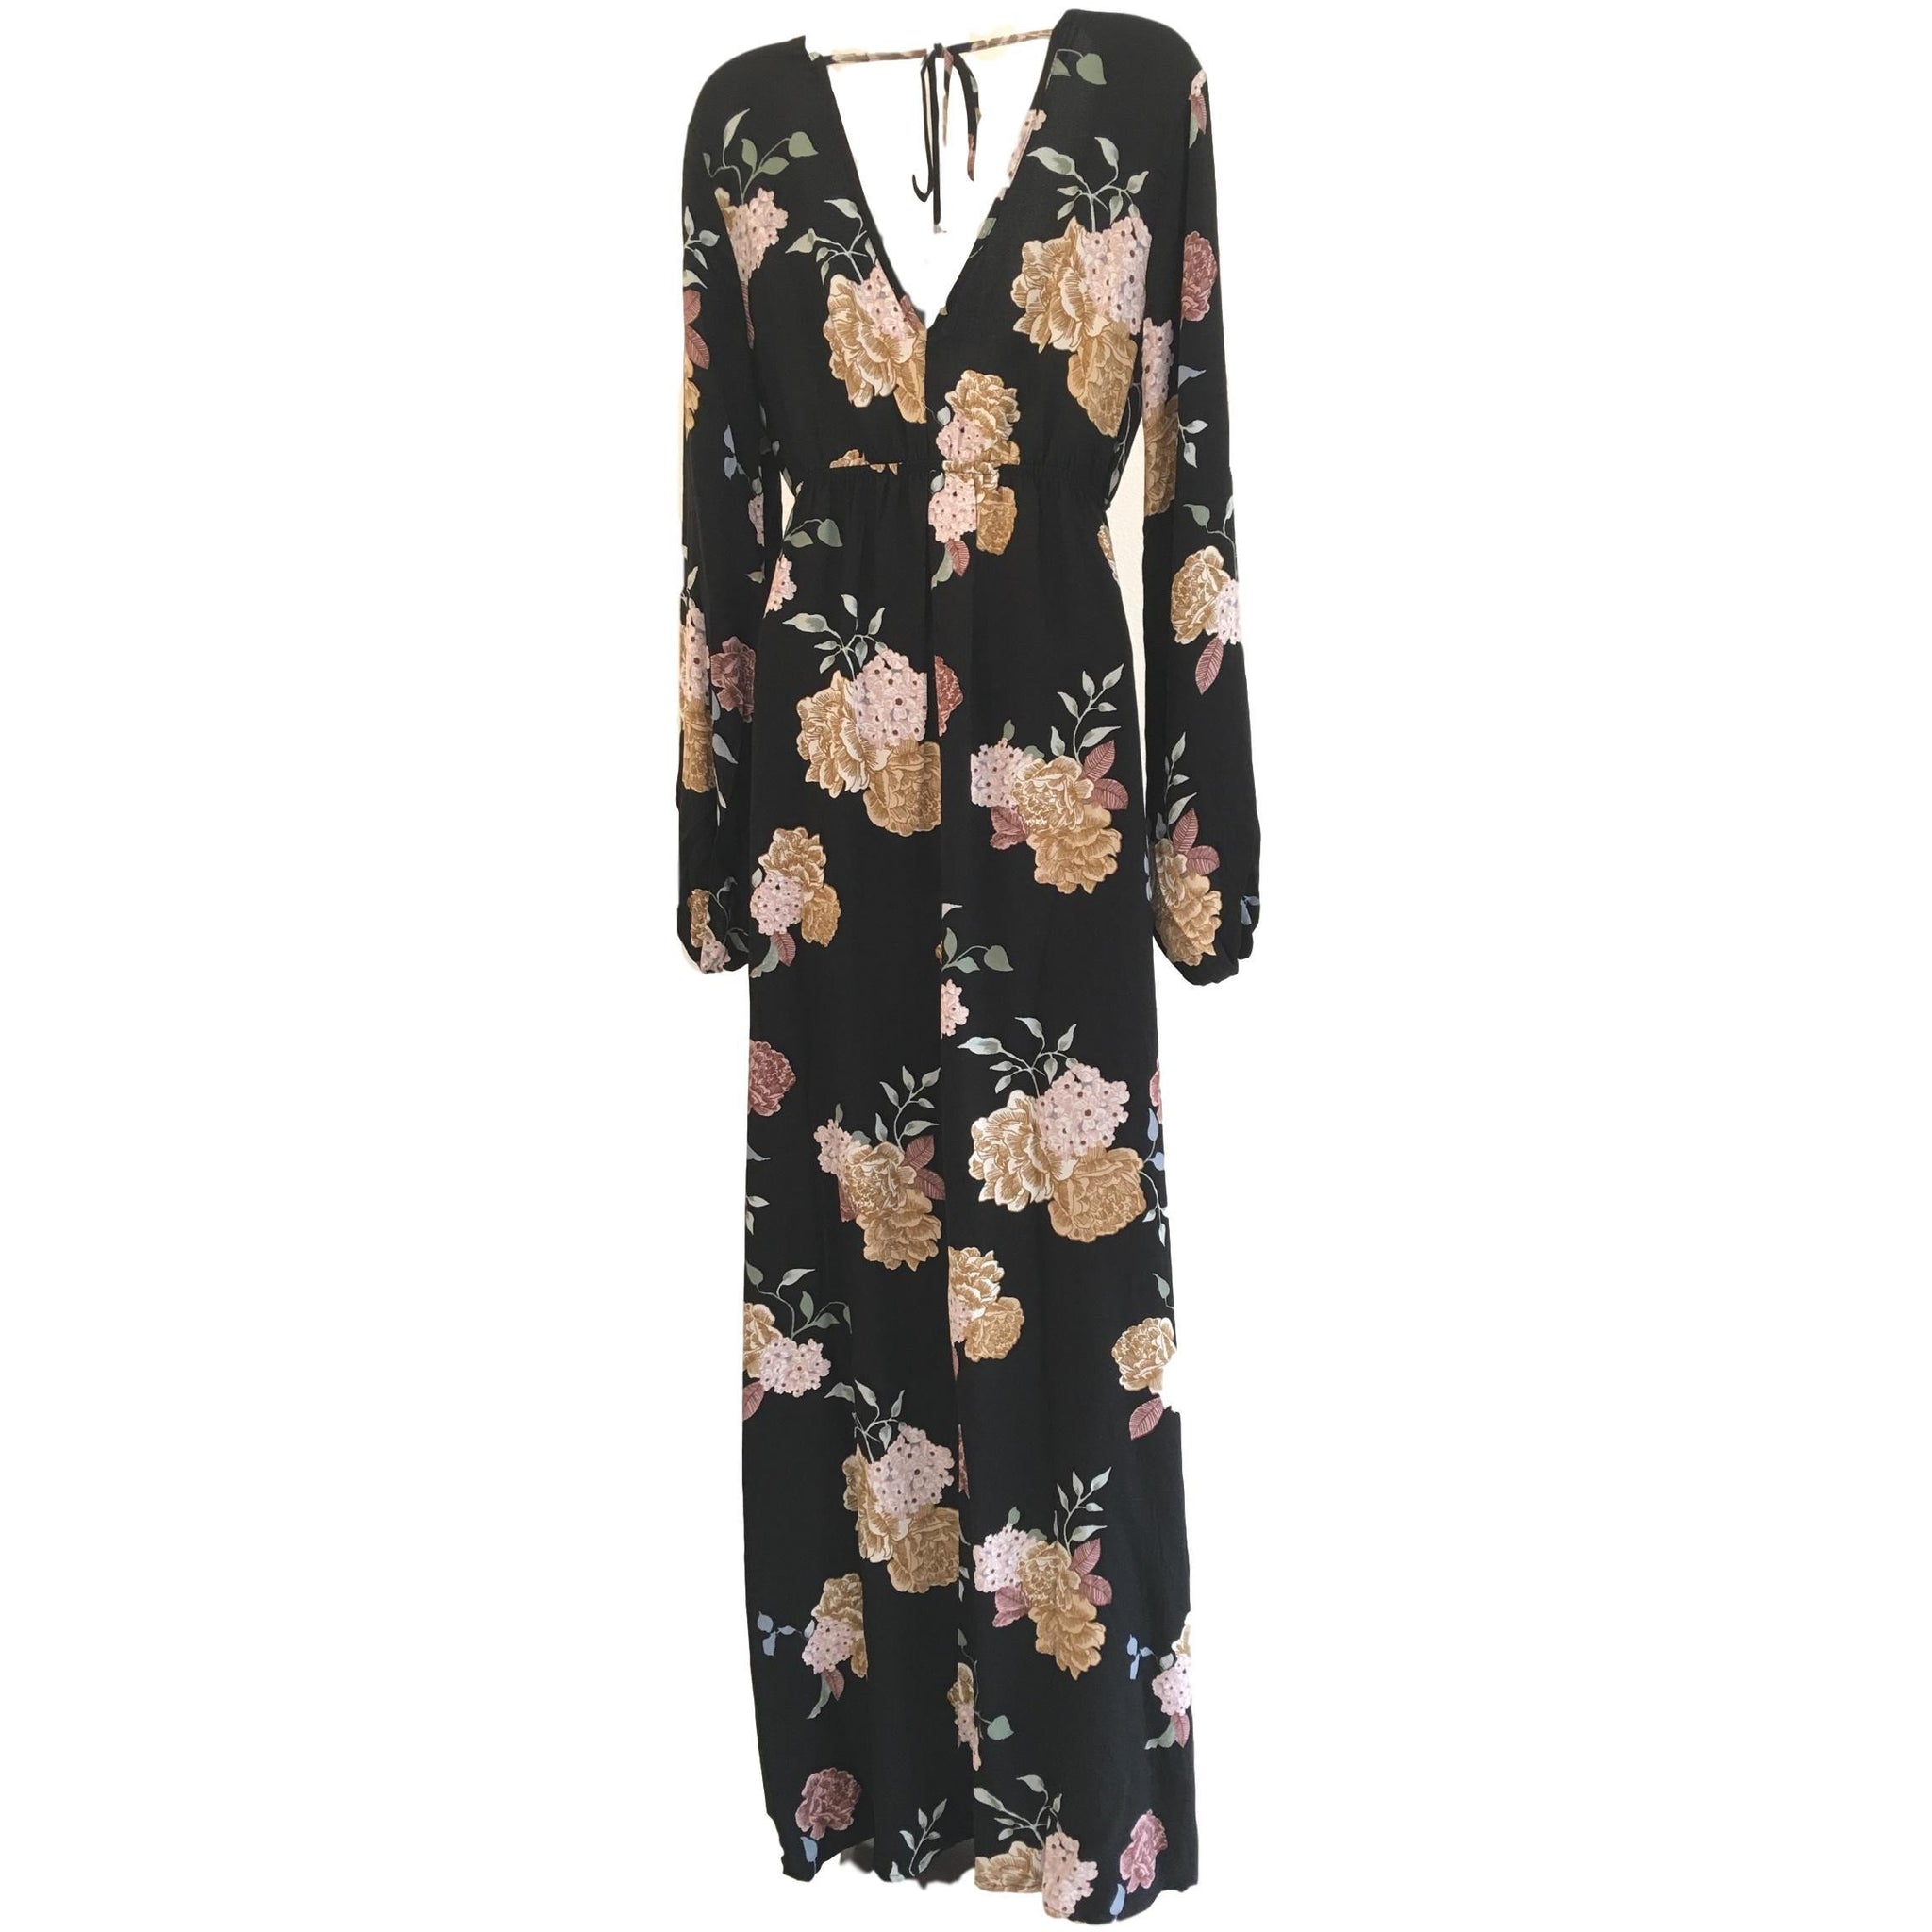 SALE ! Galina Long Sleeve Floral Maxi Dress by Lovestitch - Glamco Boutique 